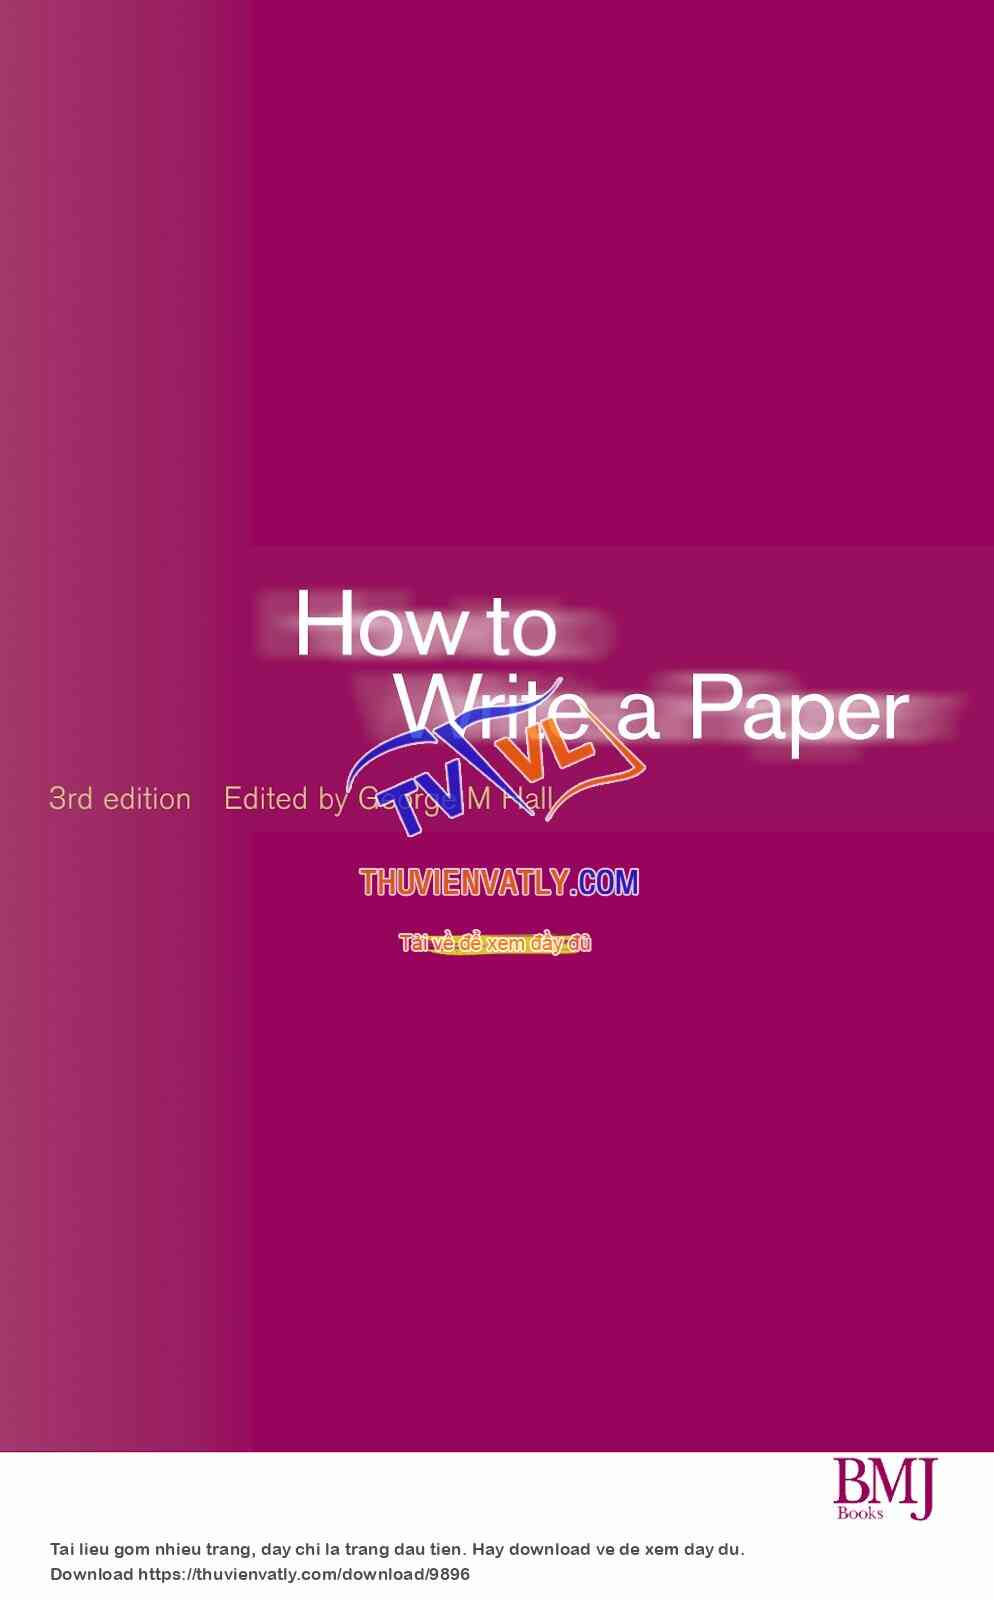 How-to-Write-a-Paper